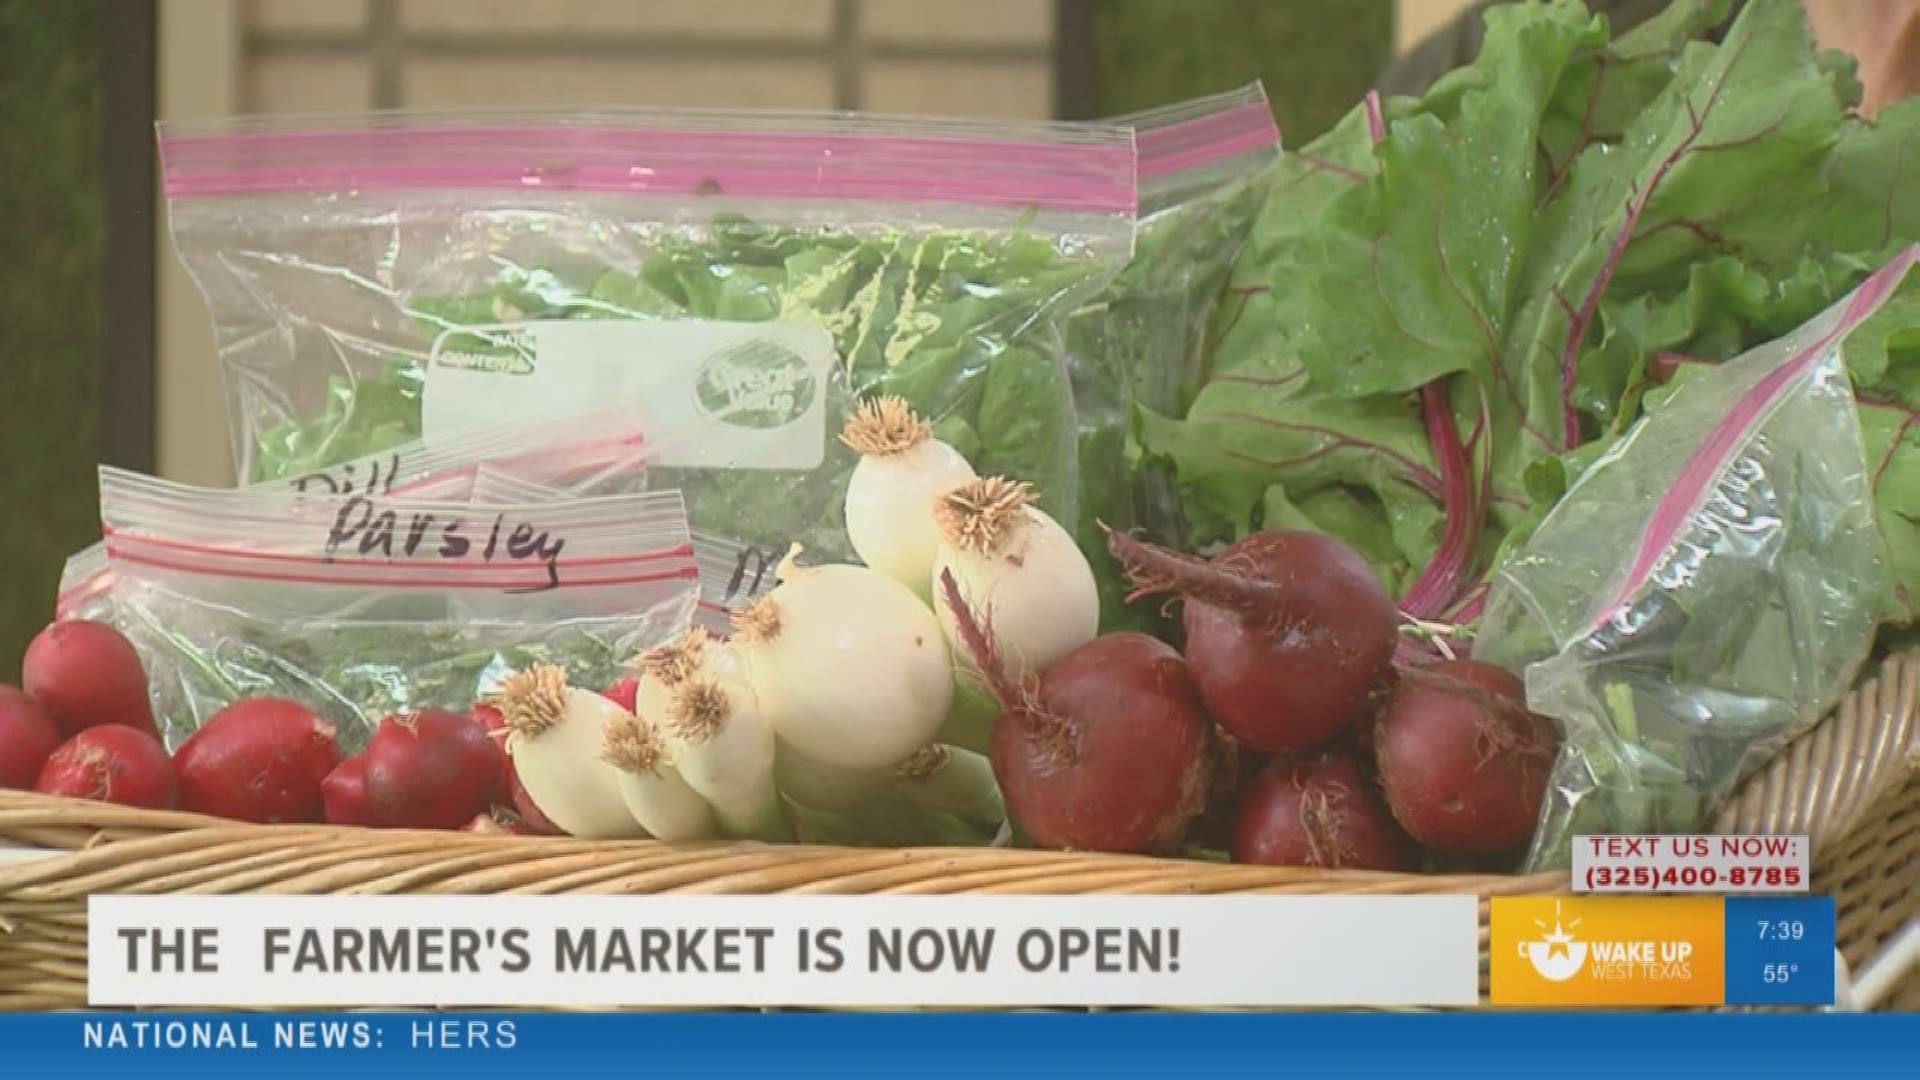 Our Malik Mingo spoke with the Concho Valley Farmer's Market about what it has to offer this season!